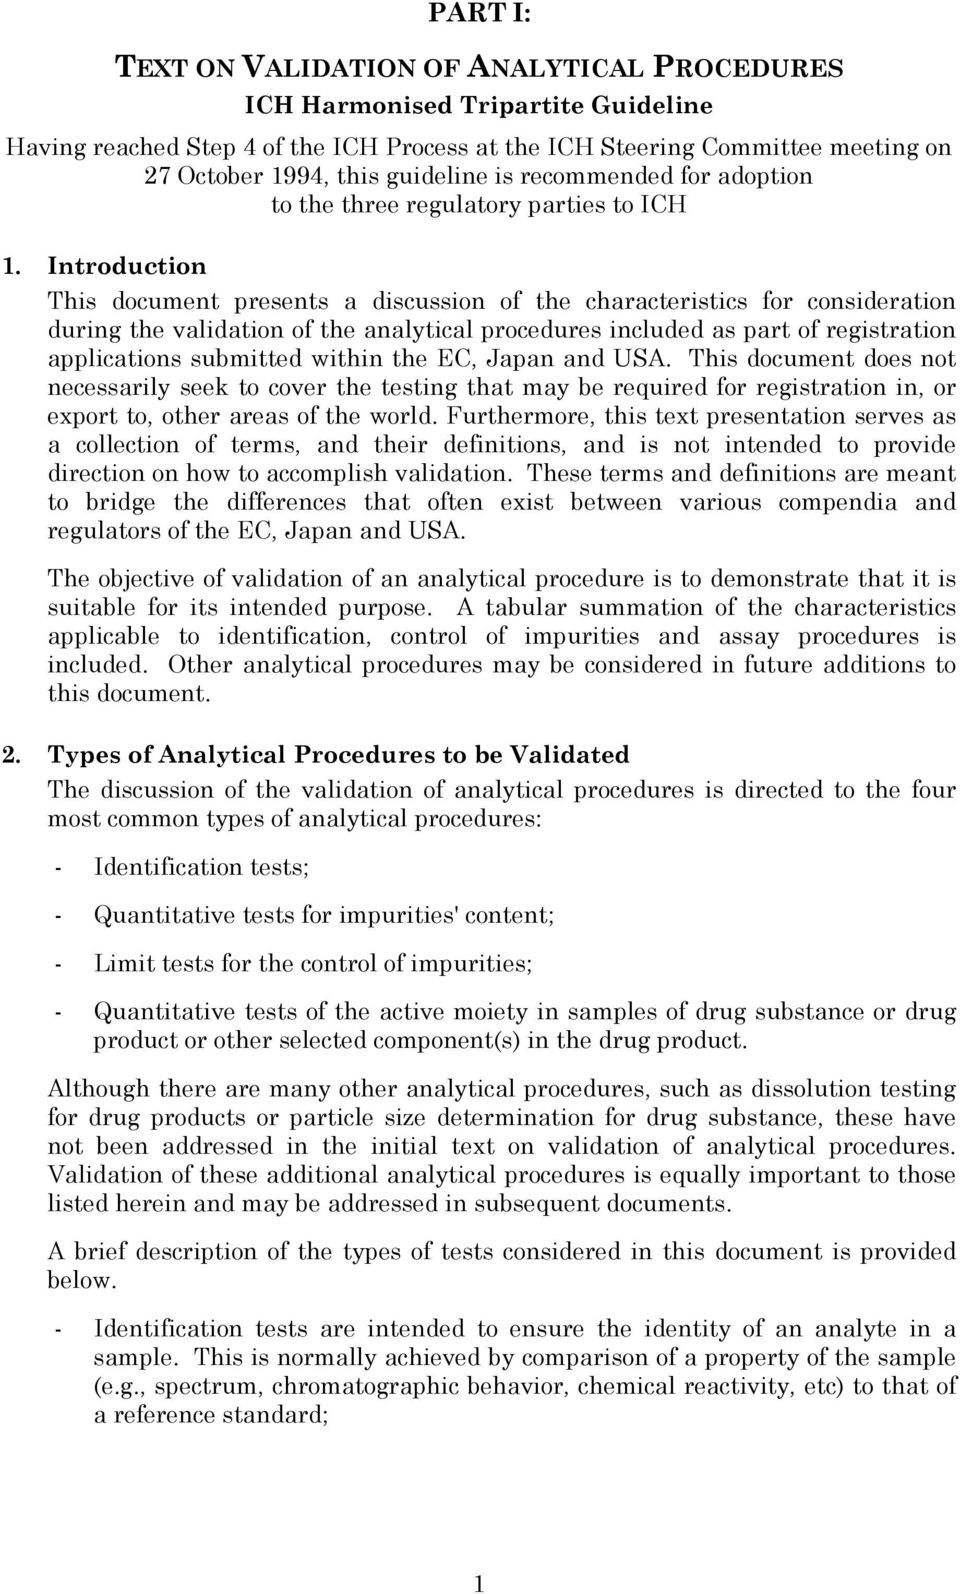 Introduction This document presents a discussion of the characteristics for consideration during the validation of the analytical procedures included as part of registration applications submitted